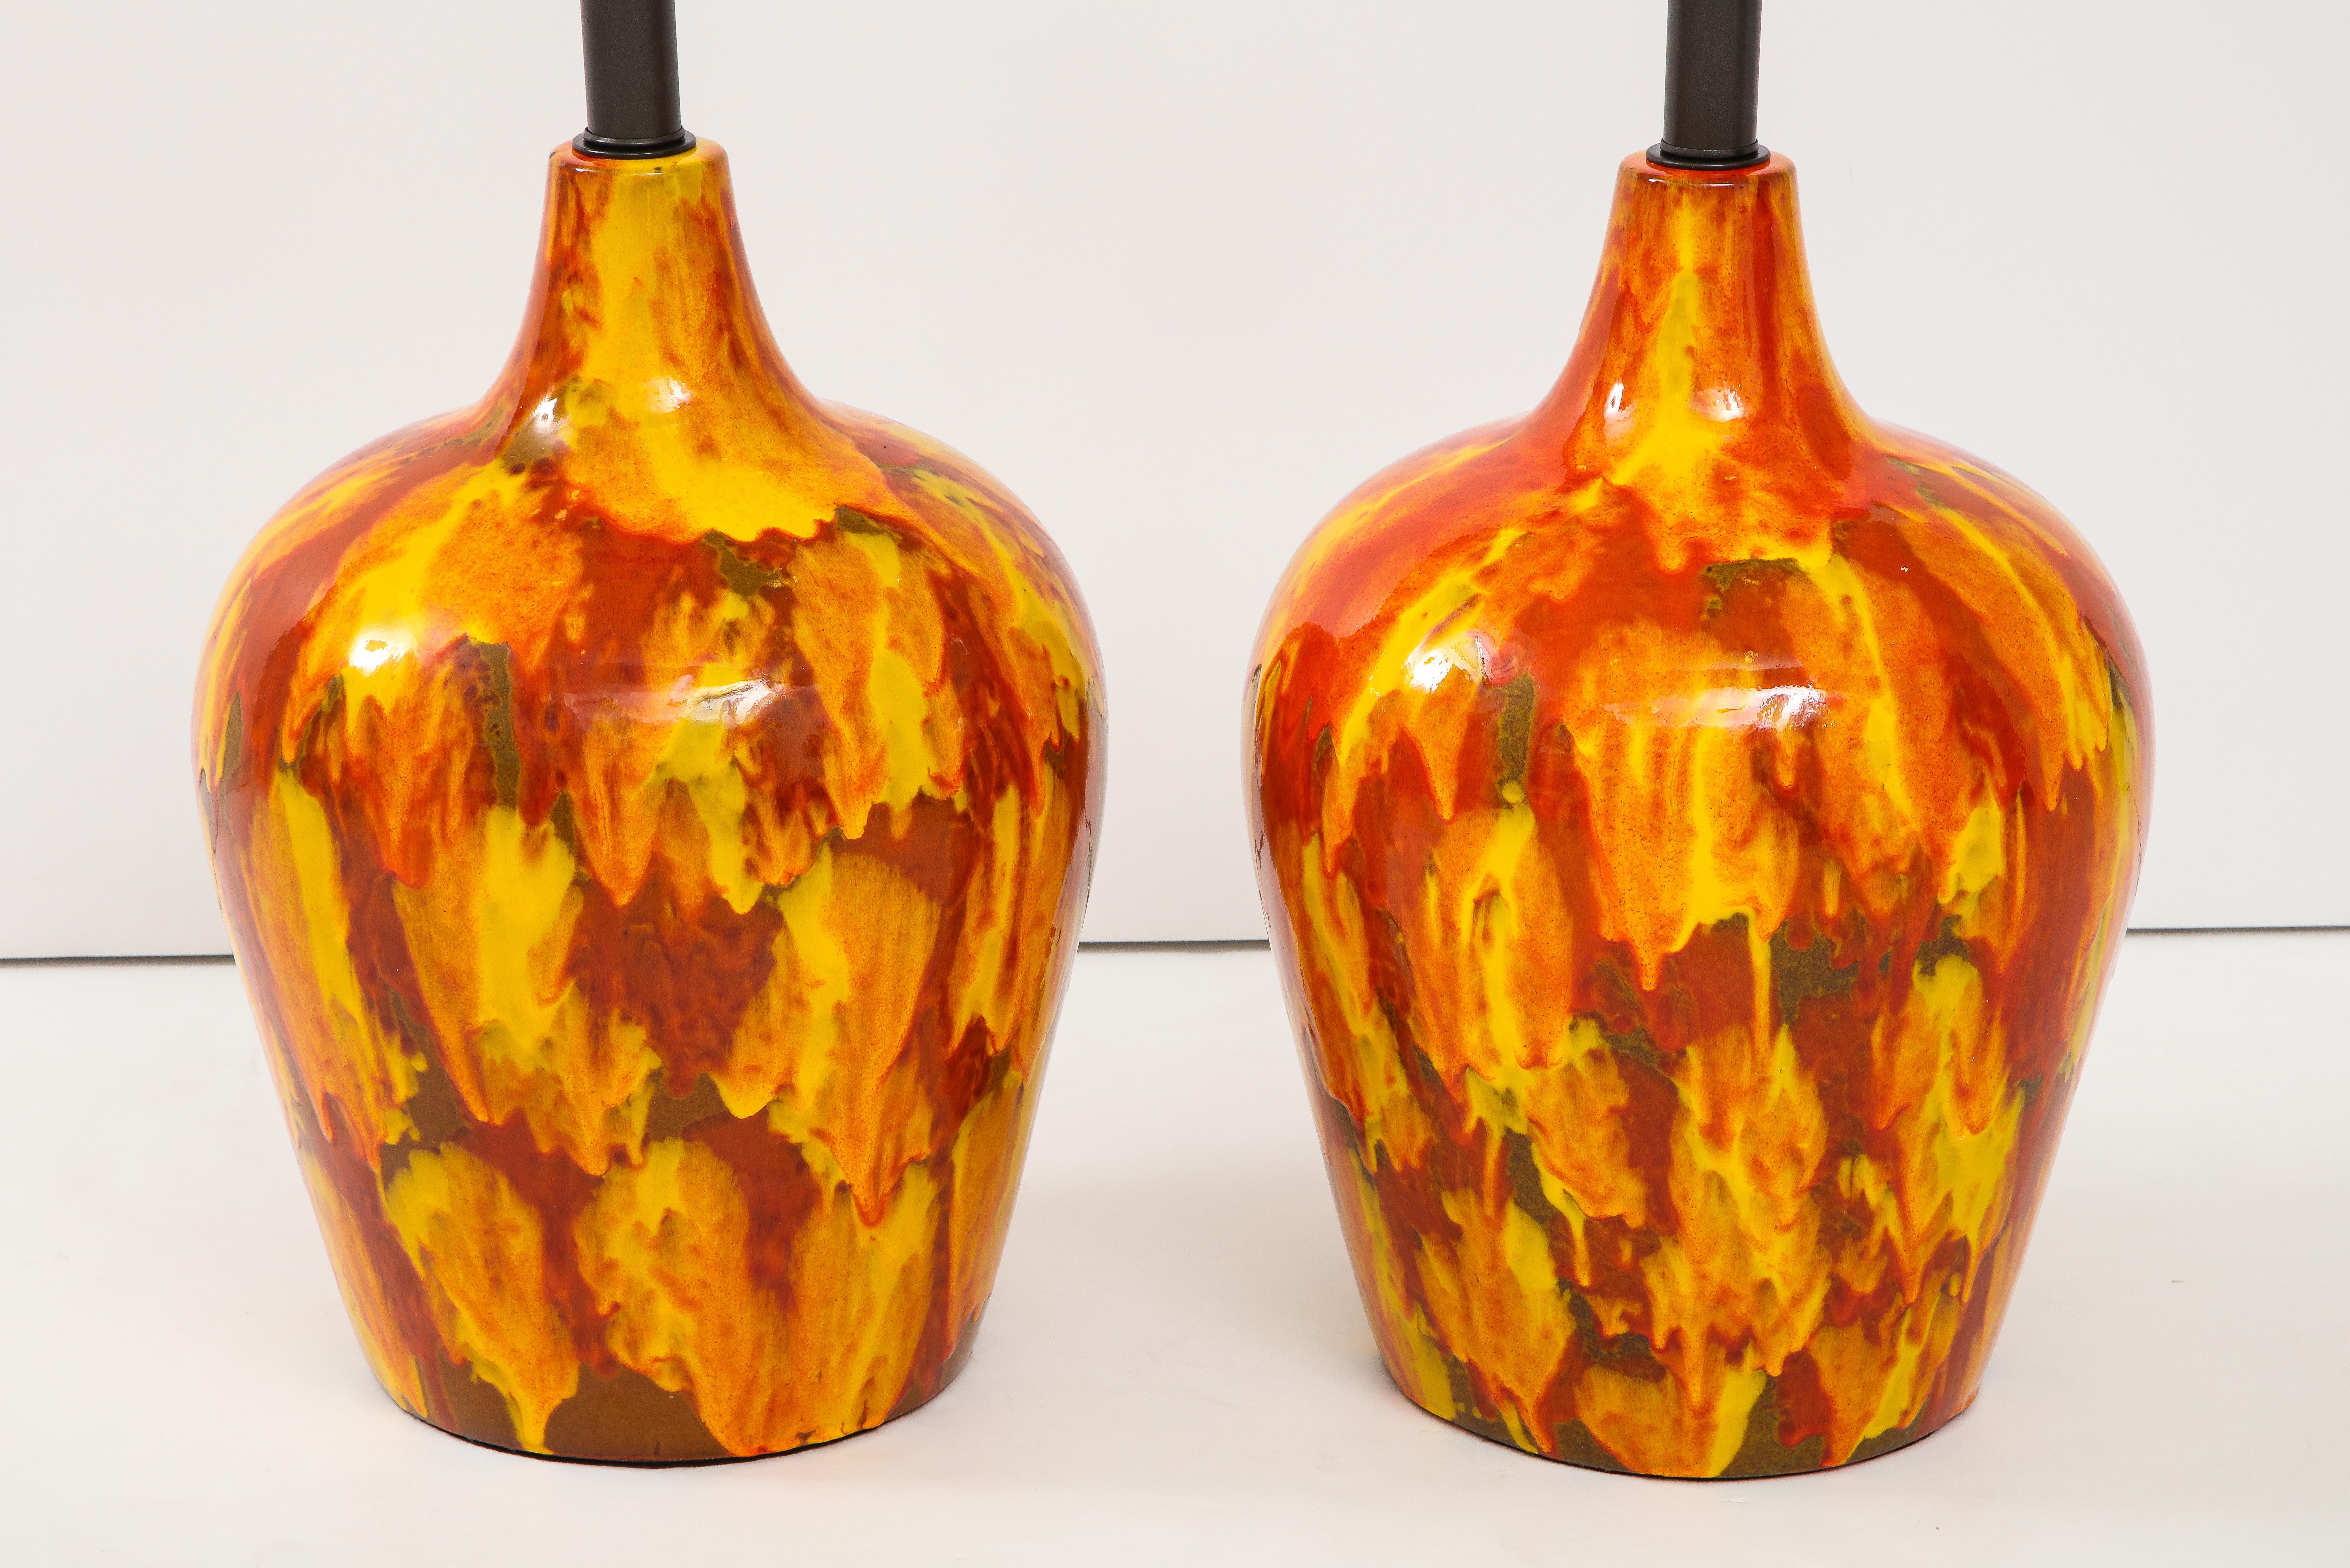 Wonderful pair of enormous ceramic lamps with a striking glazed finish.
The lamps have been newly rewired with bronzed finished adjustable double clusters
that take standard size light bulbs.
The height to the Top of the ceramic is 21